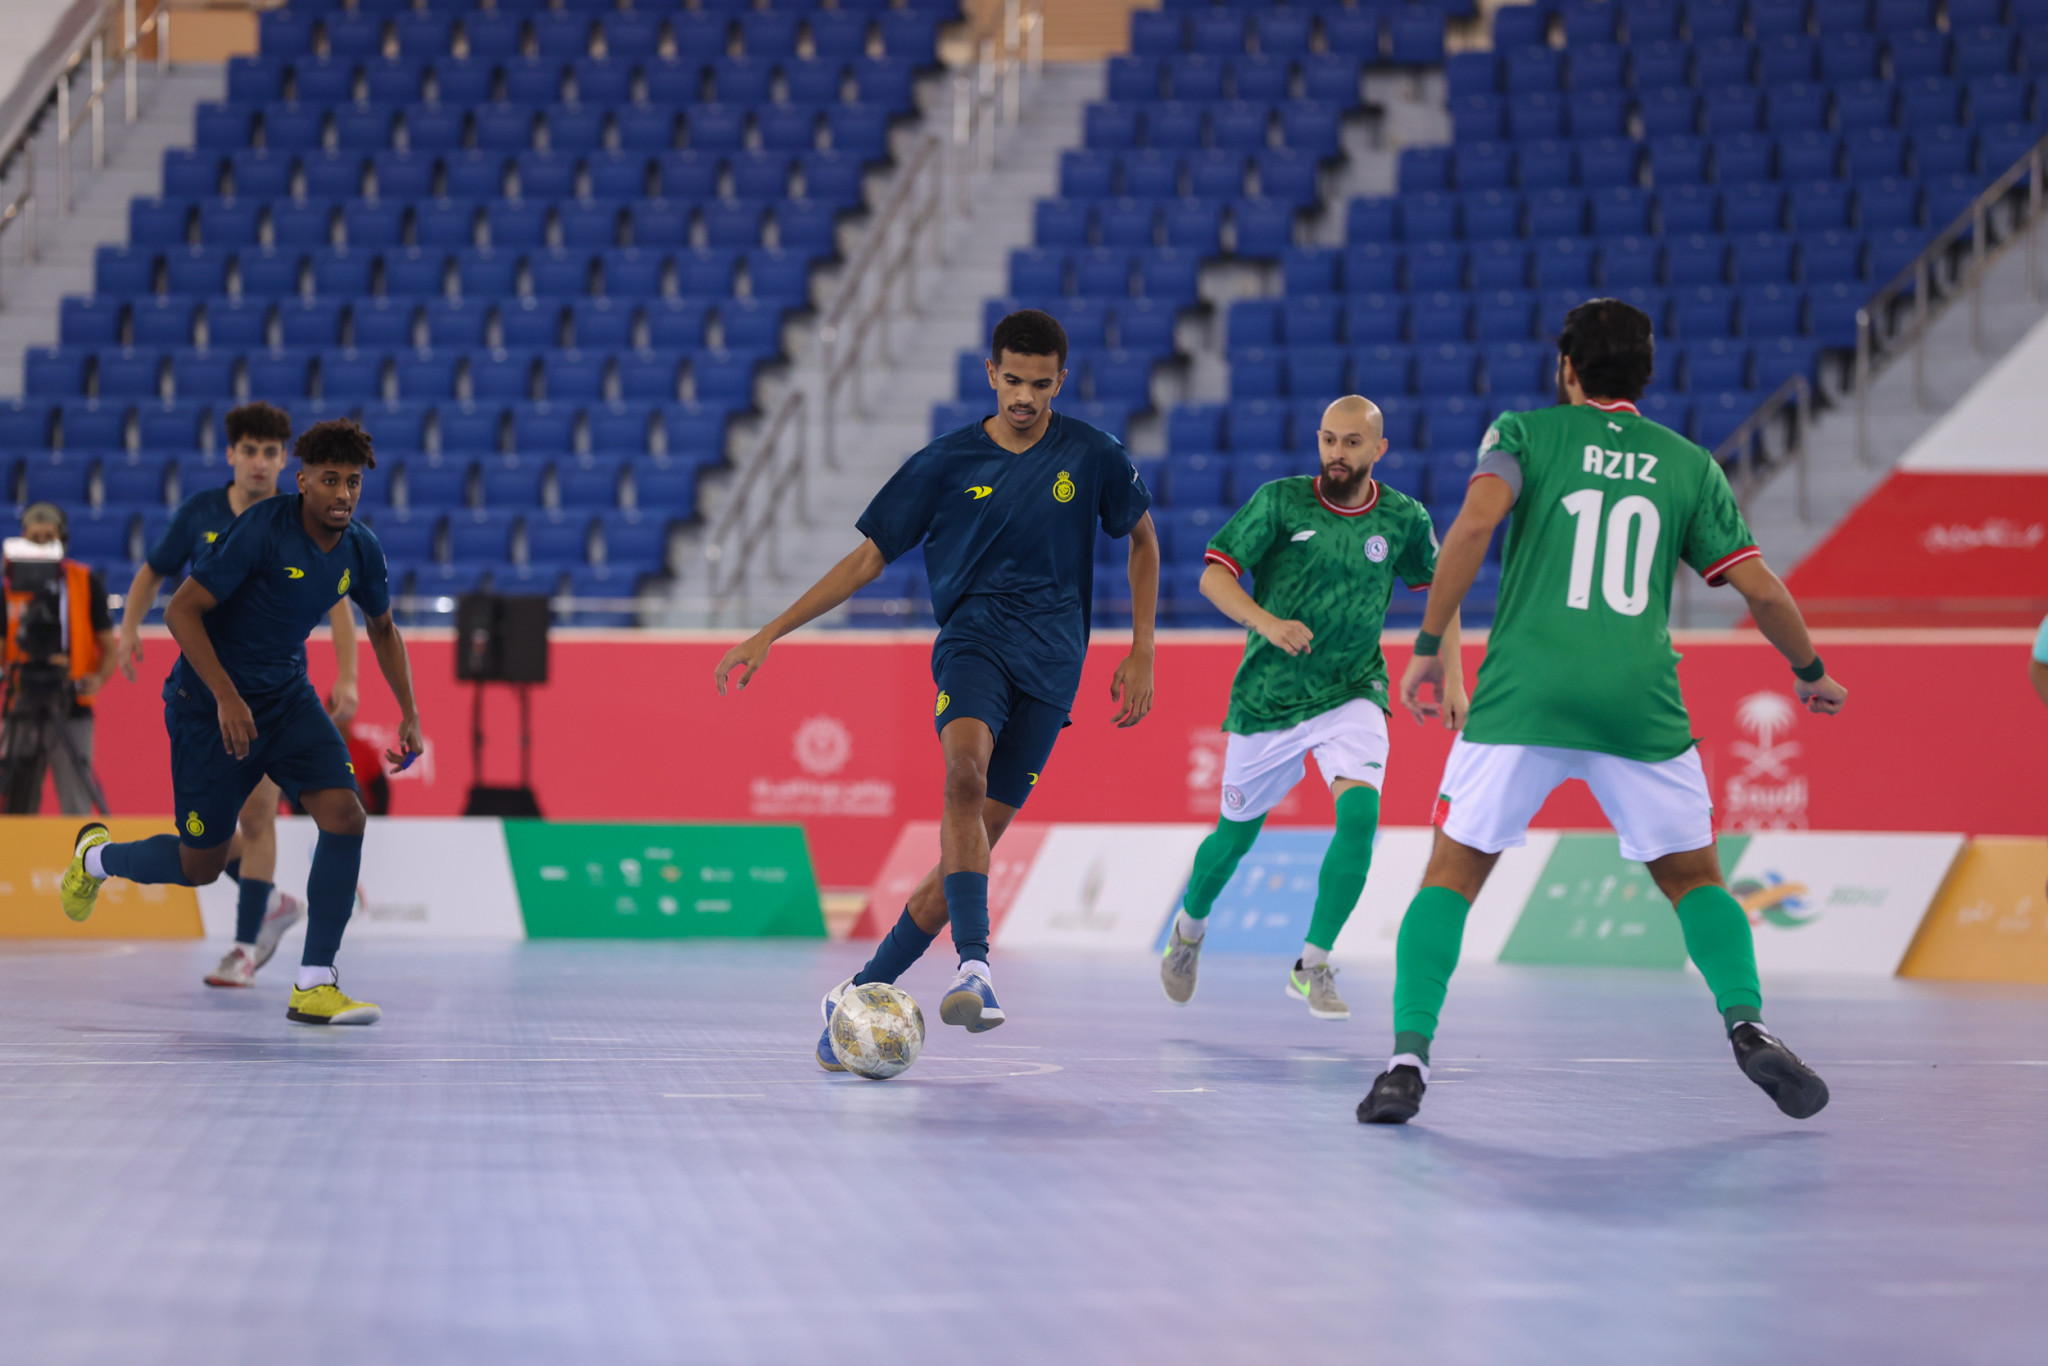 insidethegames is reporting LIVE from the Saudi Games in Riyadh